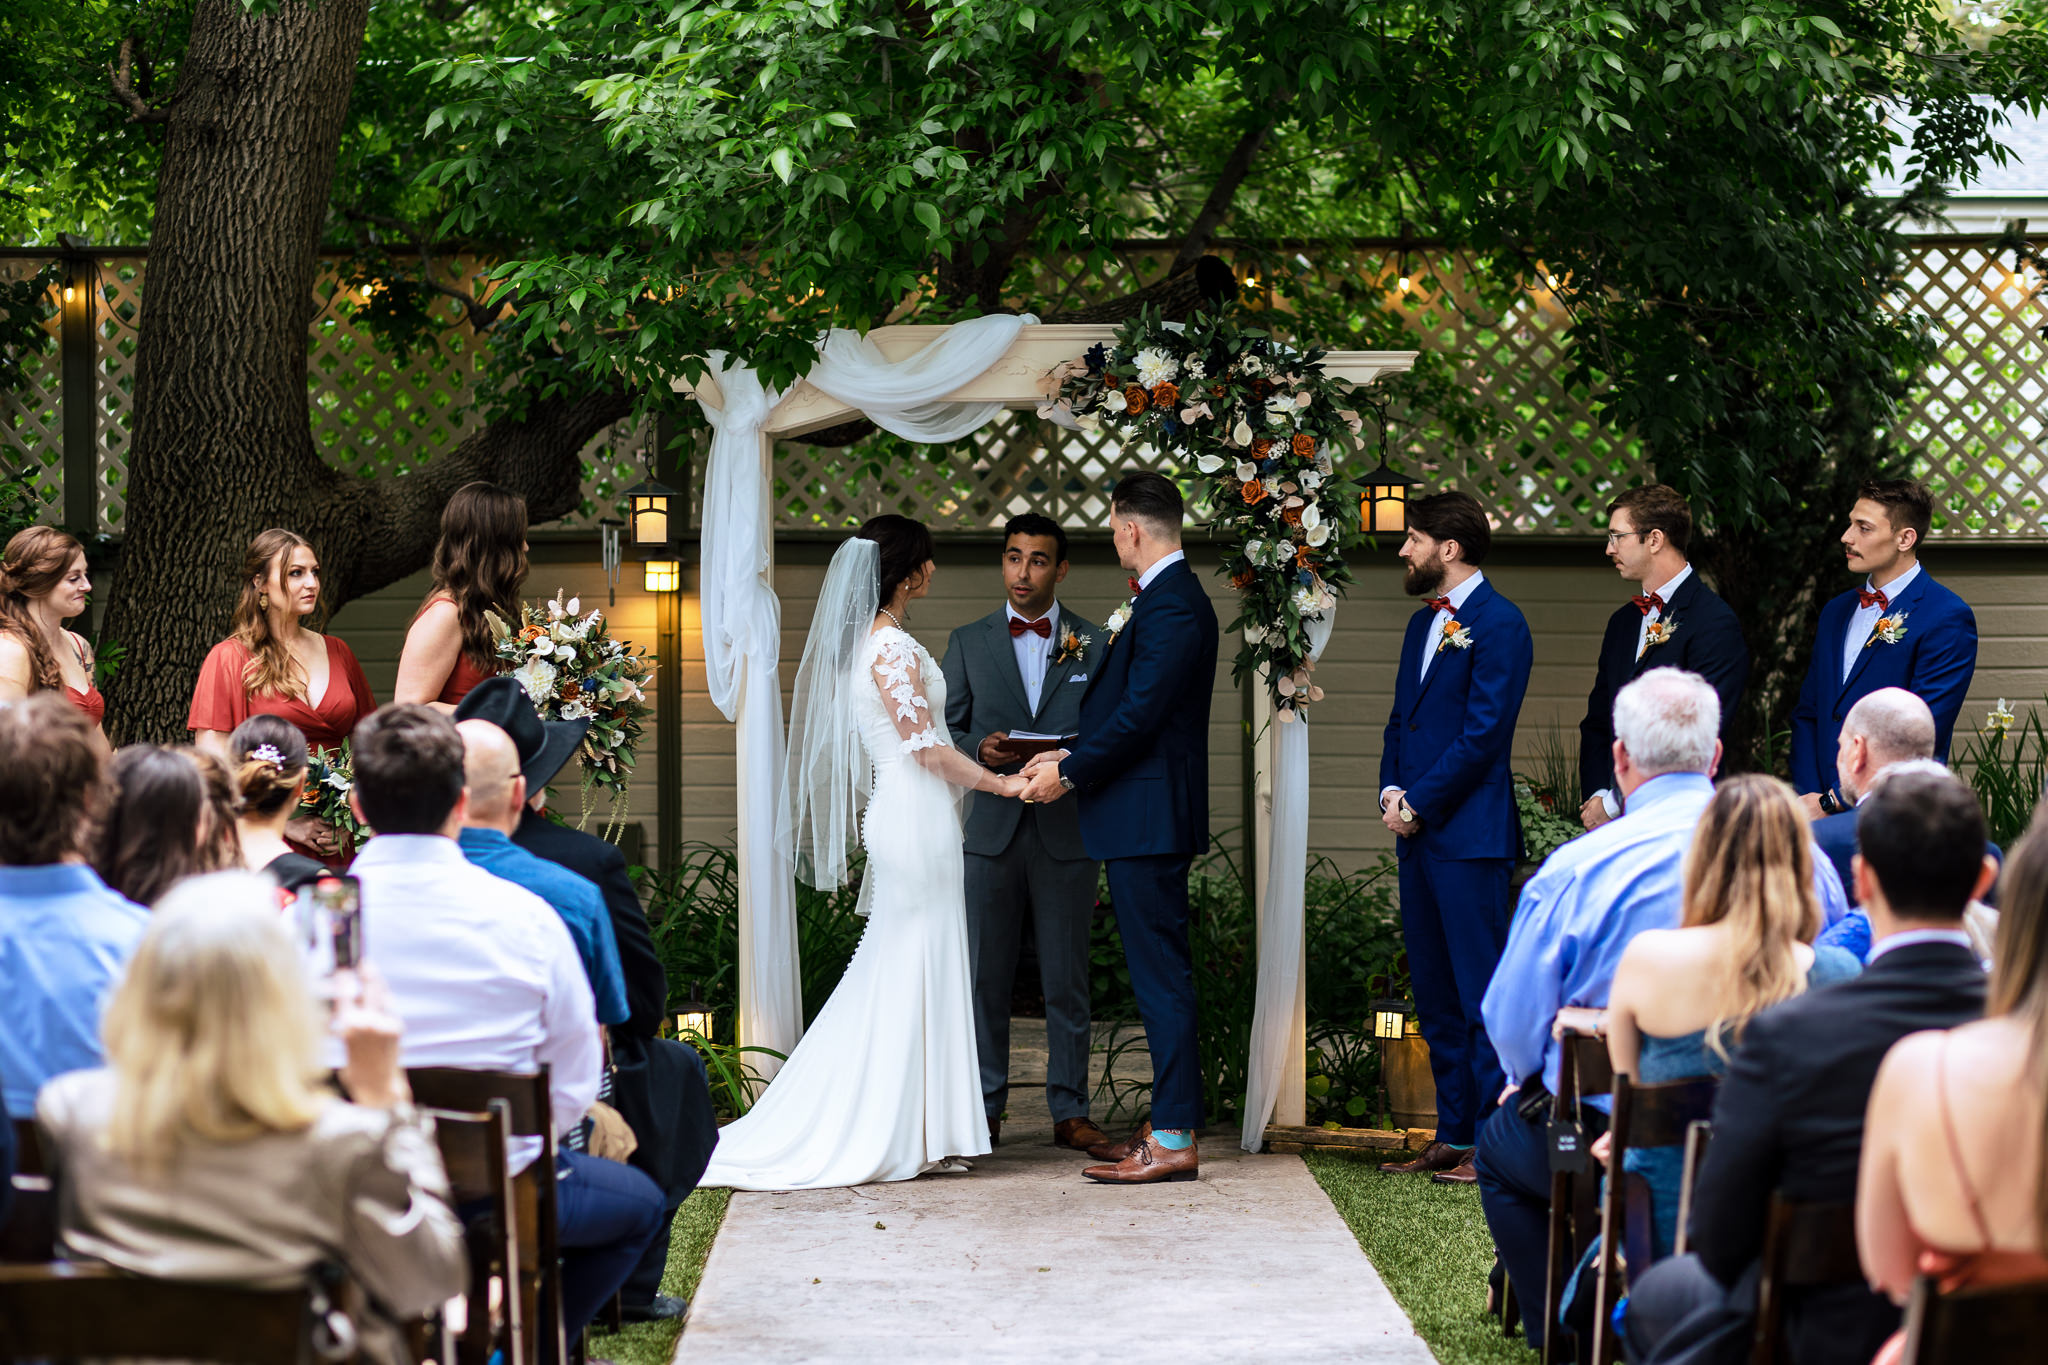 Bride & Groom holding hands while standing at the alter for Haley & Gytenis' Summer Wedding at The McCreery House by Colorado Wedding Photographer, Jennifer Garza.